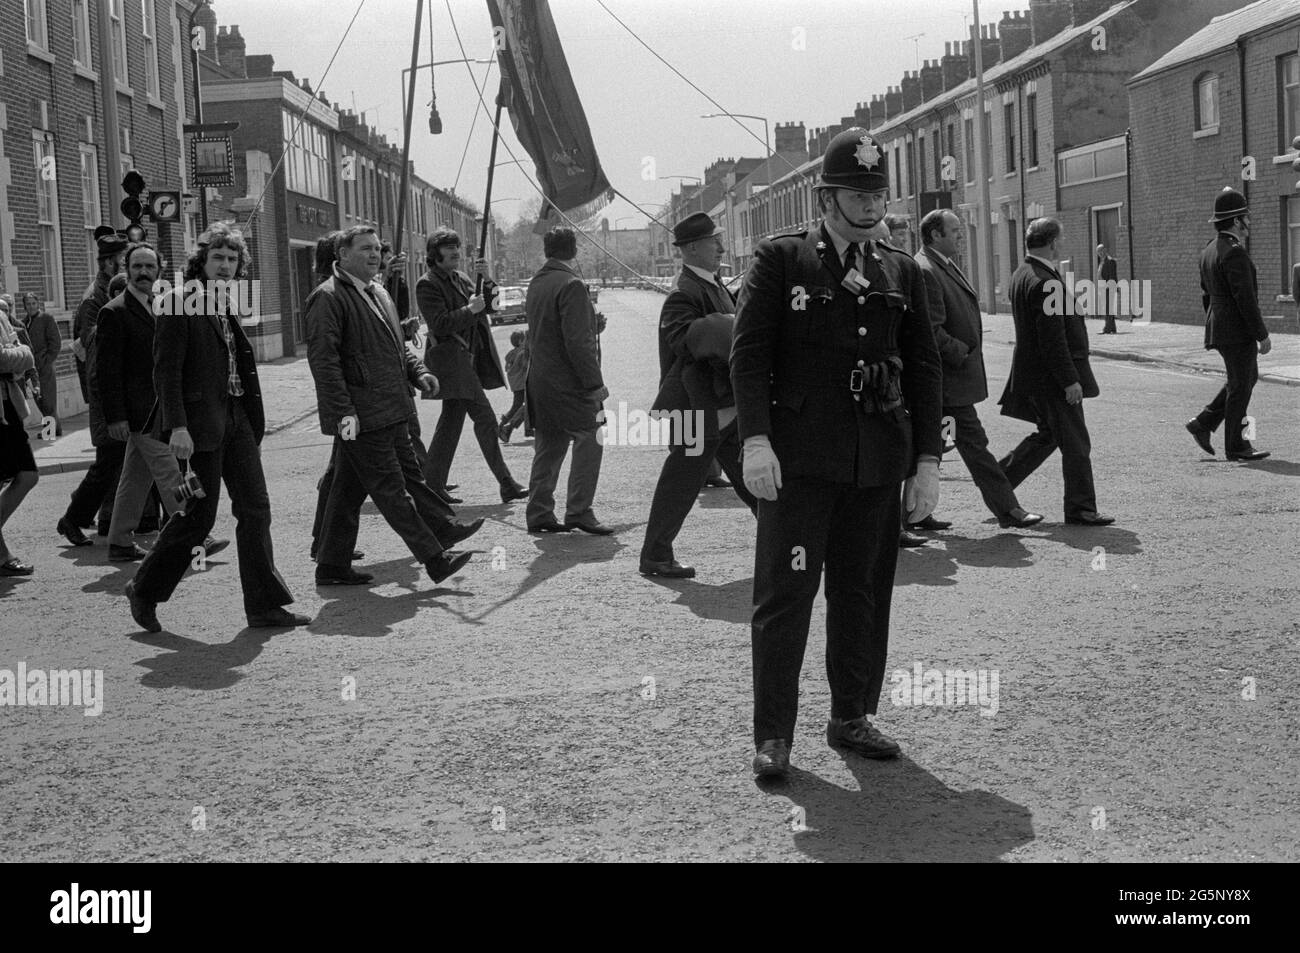 Parade MAYDAY, Cardiff, pays de Galles, 1973 Banque D'Images